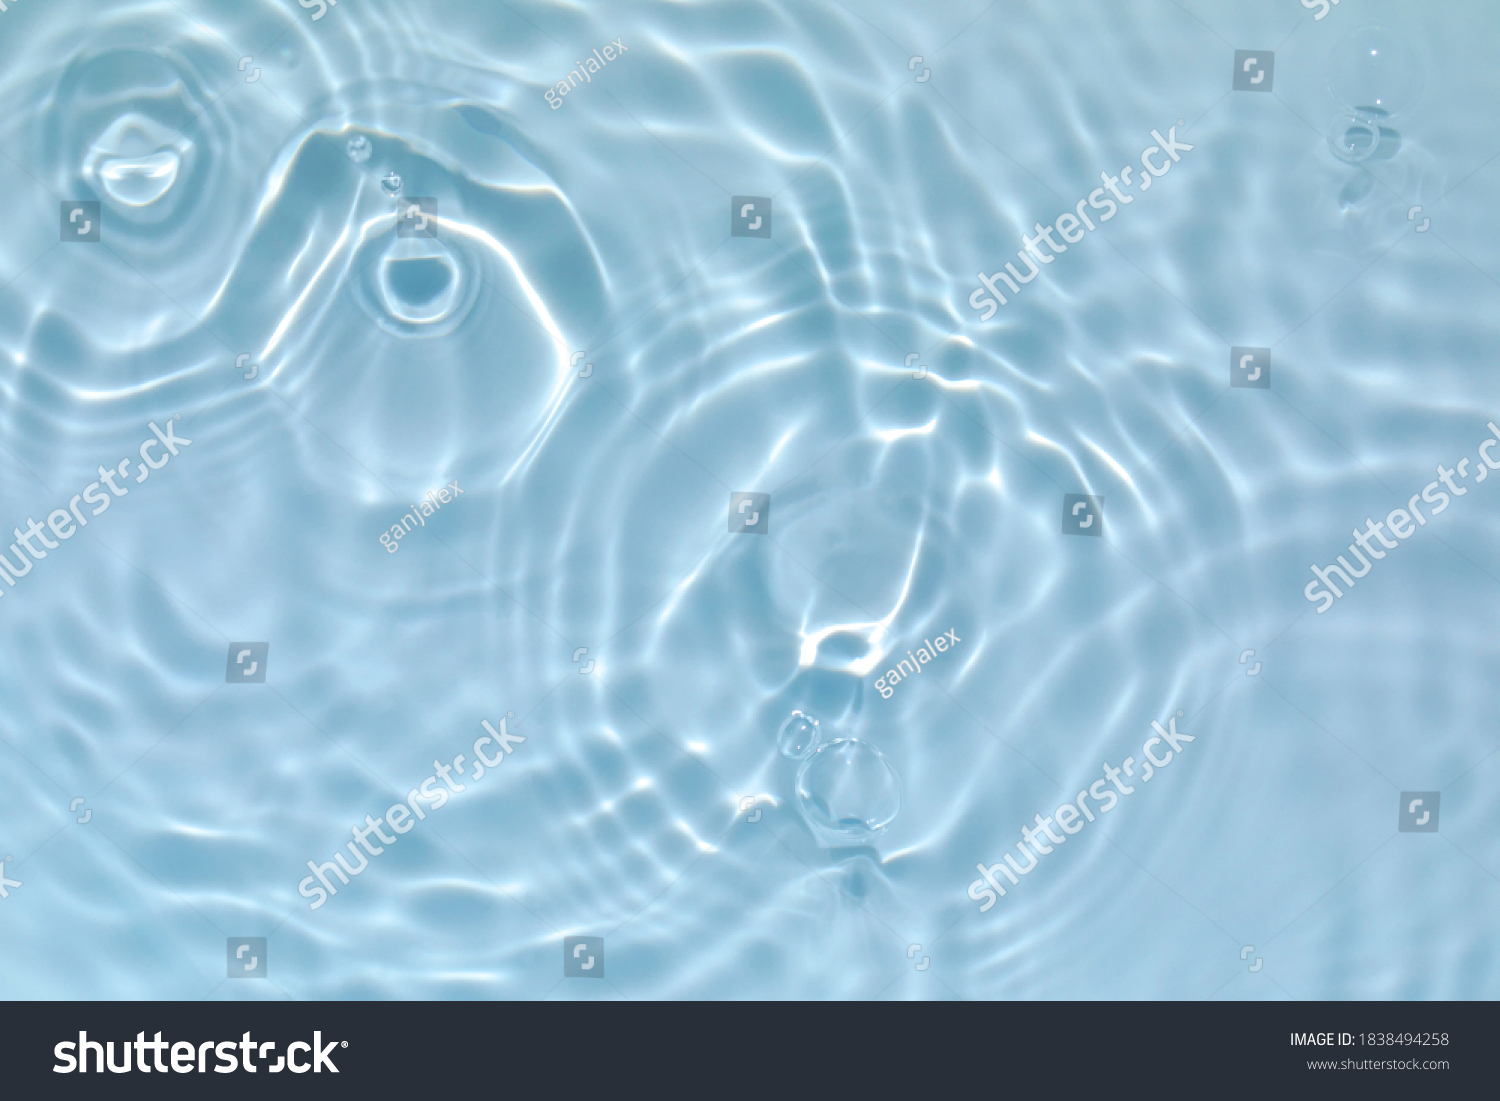 De-focused blurred transparent blue colored clear calm water surface texture with splashes and bubbles. Trendy abstract nature background. Water waves in sunlight with copy space. #1838494258